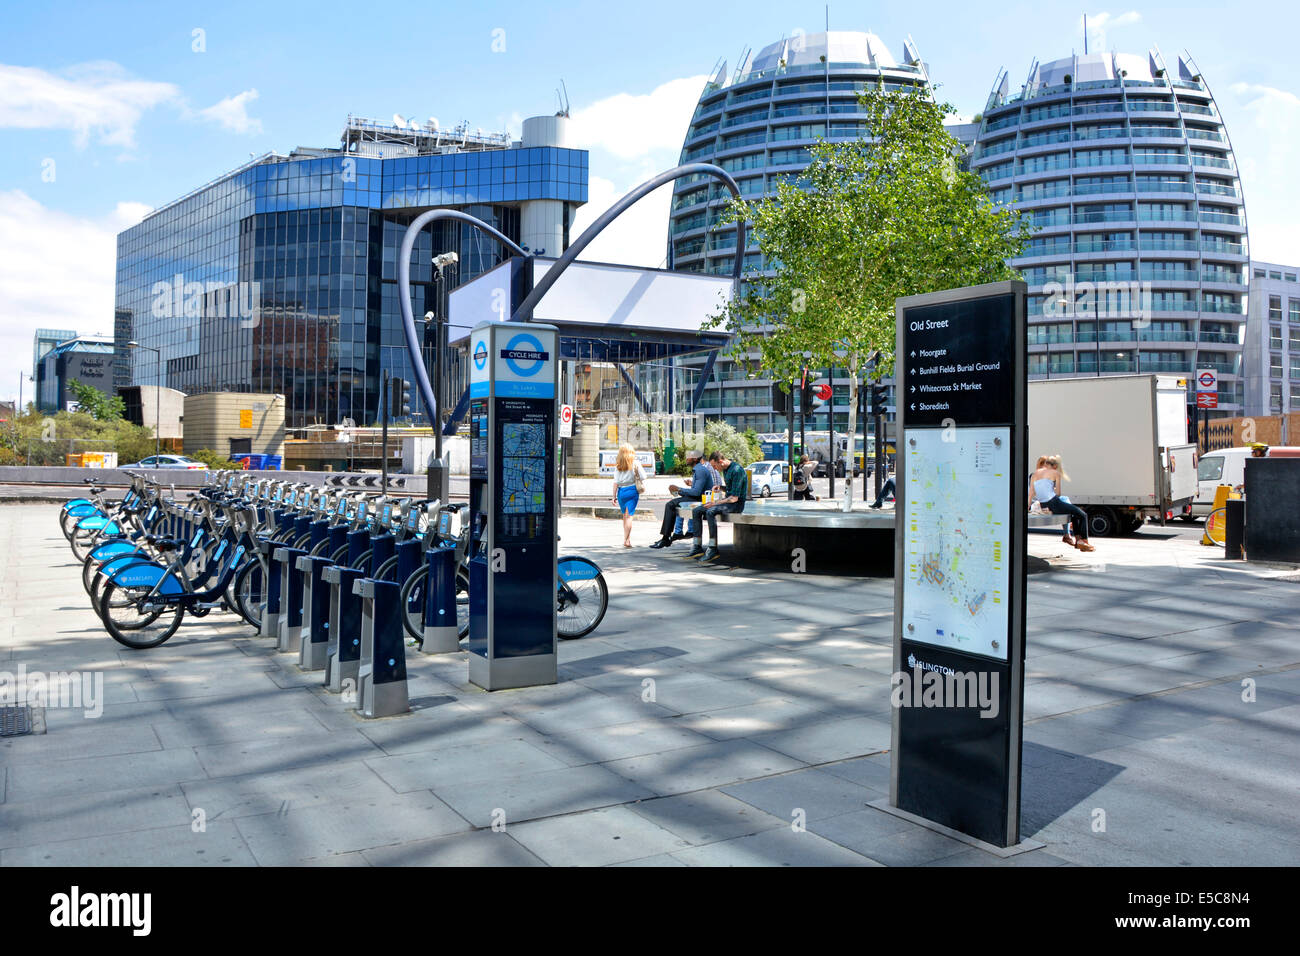 Old Street Roundabout junction of Old Street & City Road adjacent areas referred to as Silicon Roundabout or Tech City Barclays bike hire docking UK Stock Photo